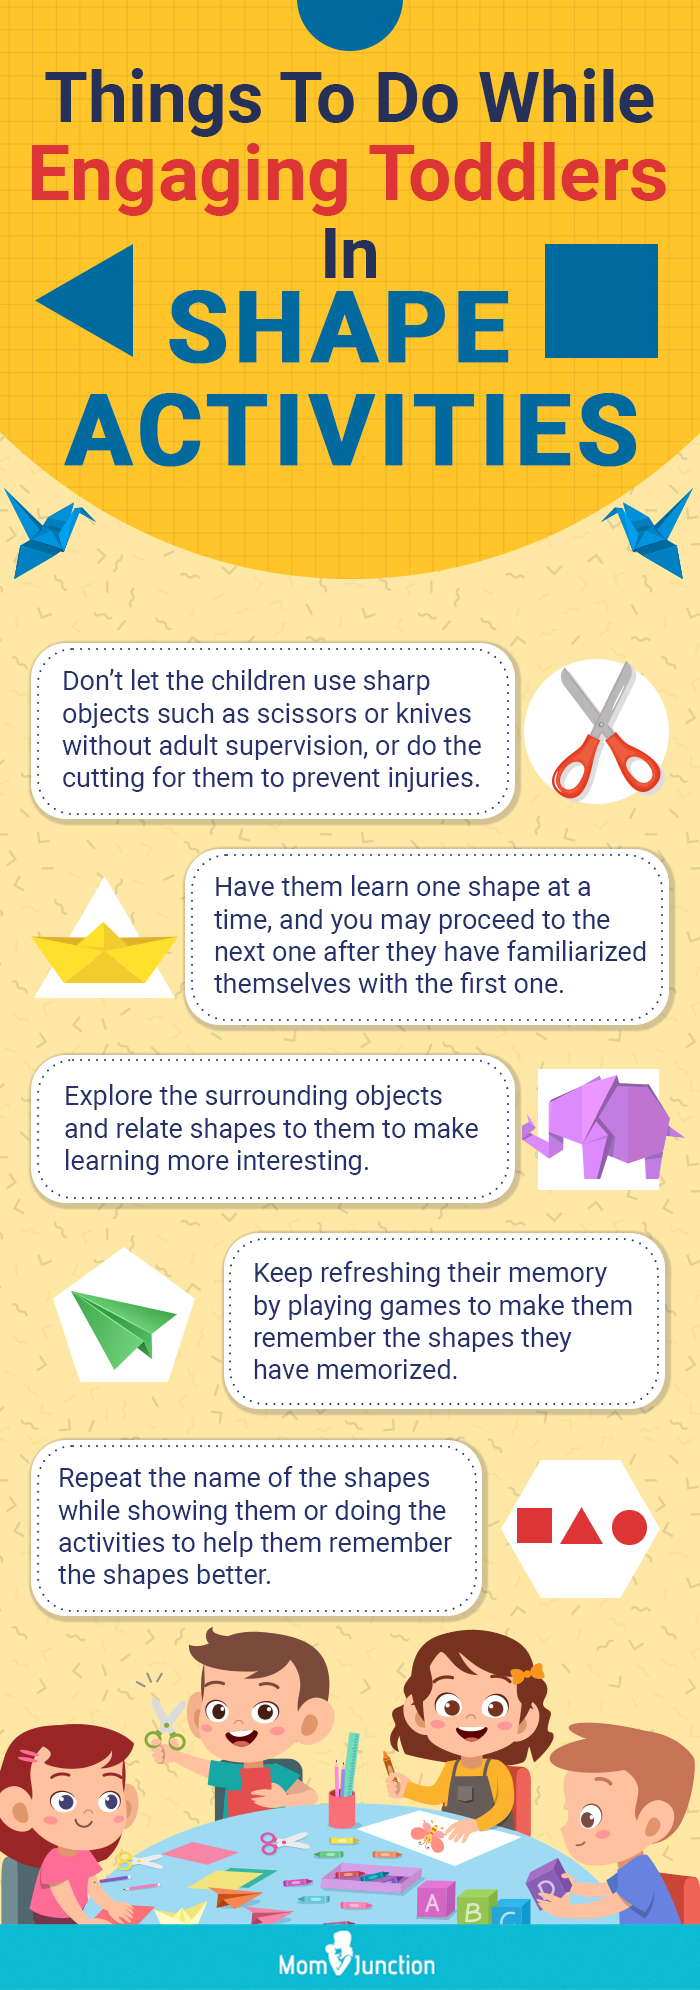 things to do while engaging toddlers in shape activities [infographic]